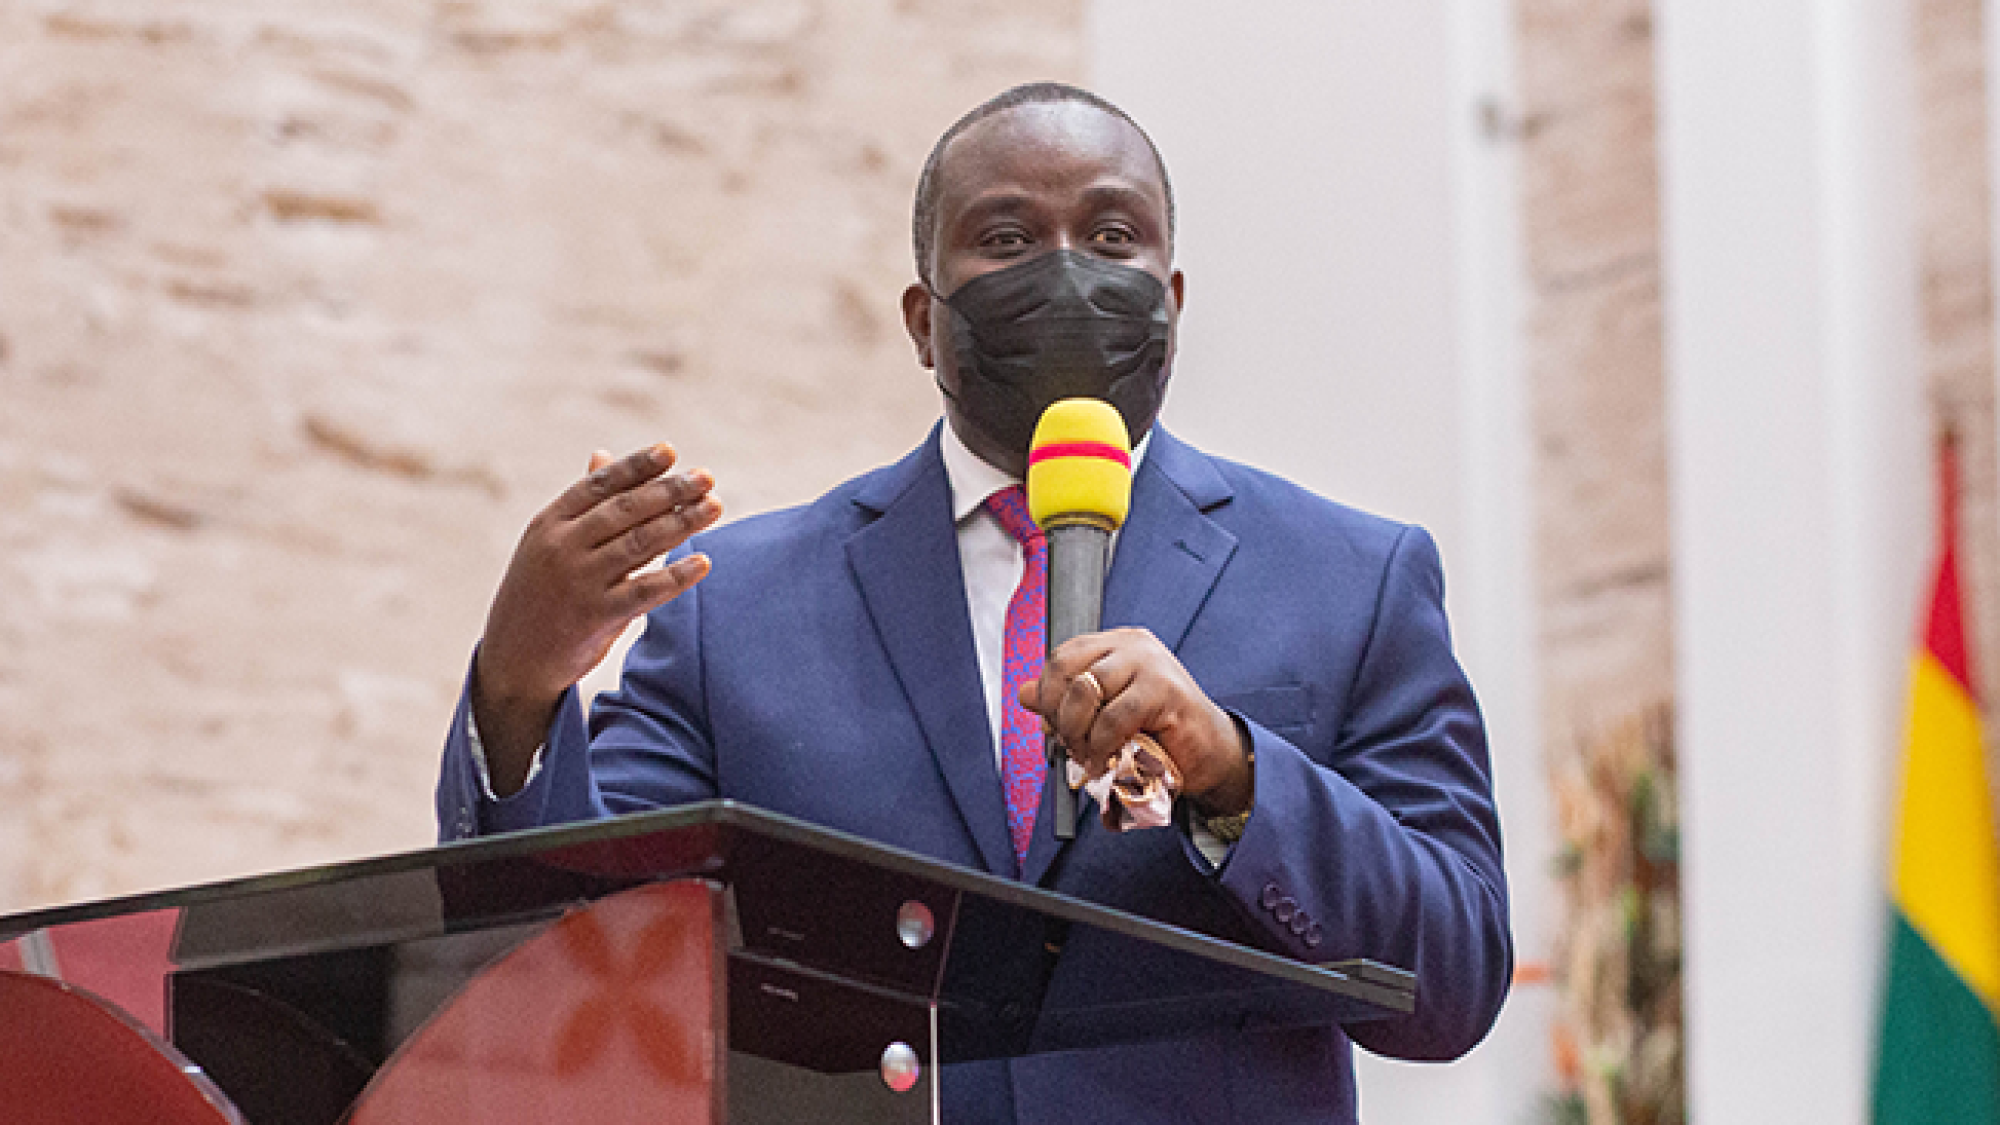 The International Missions Director (IMD) of The Church of Pentecost, Apostle Emmanuel Agyemang Bekoe